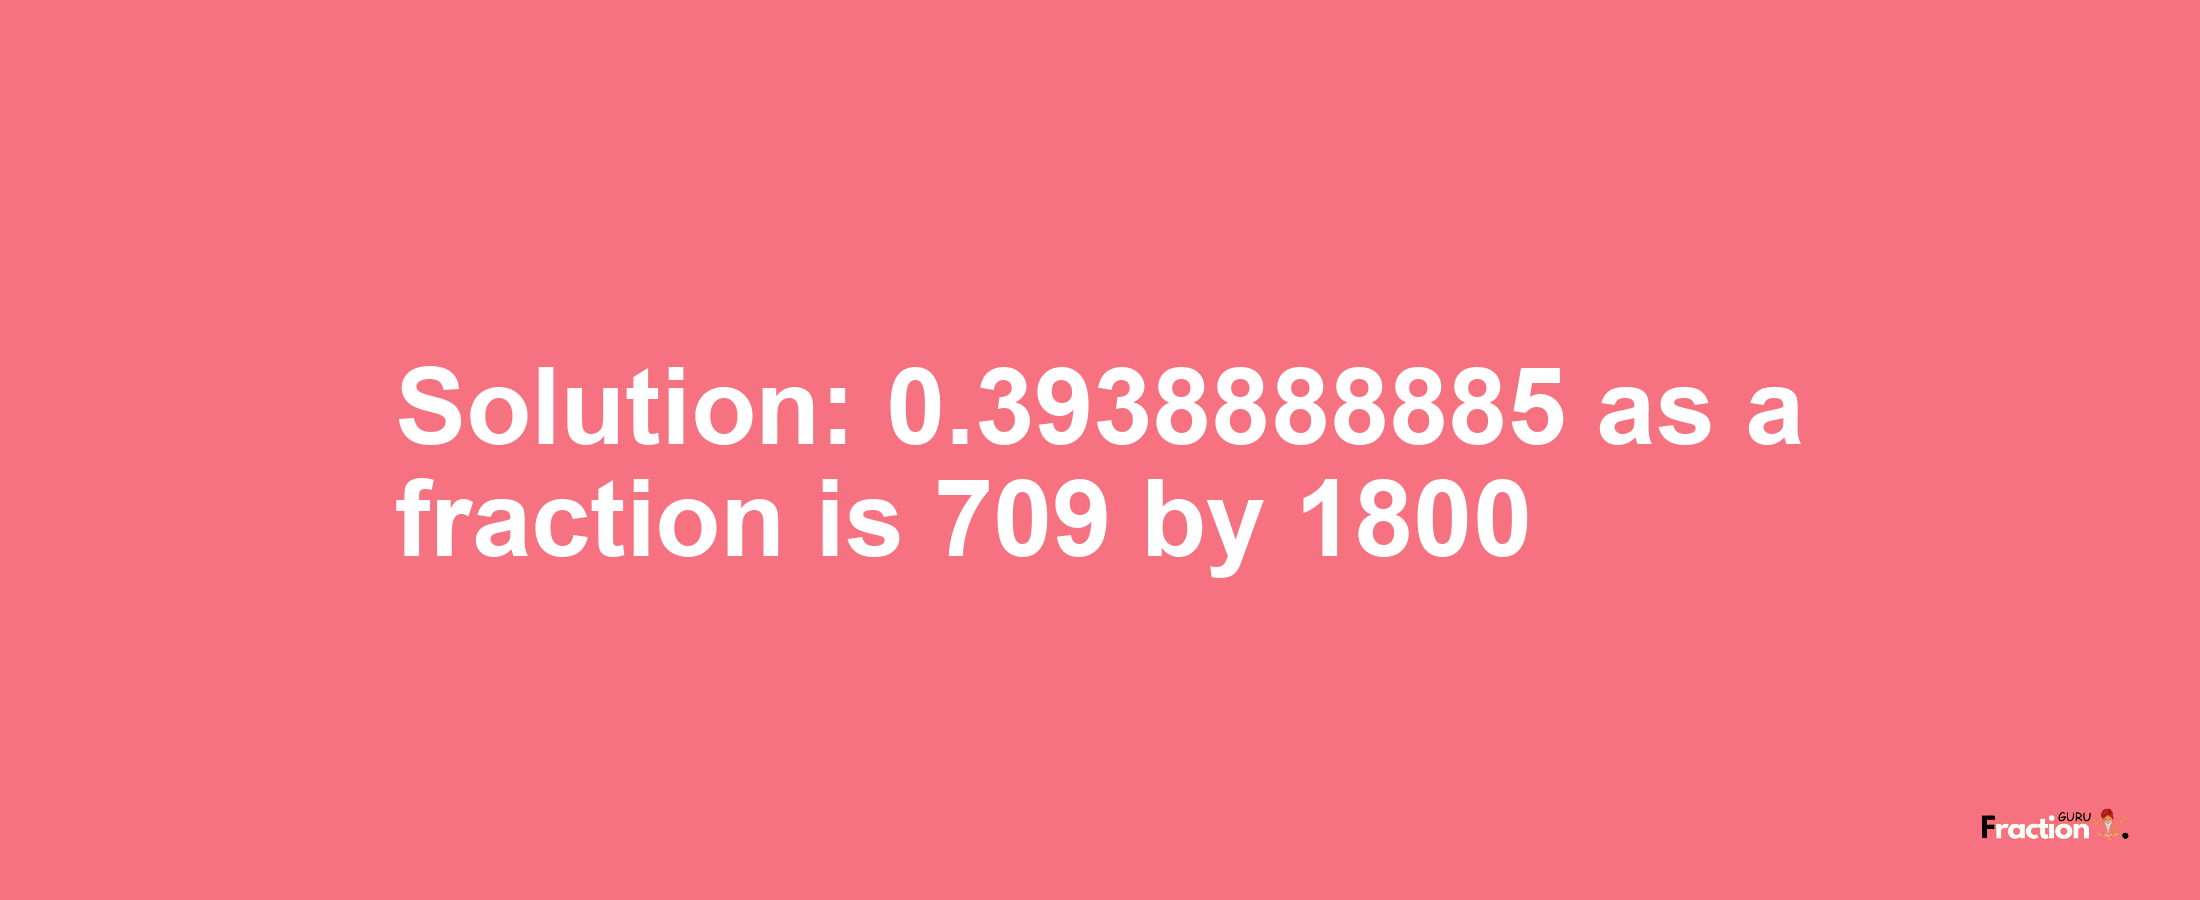 Solution:0.3938888885 as a fraction is 709/1800